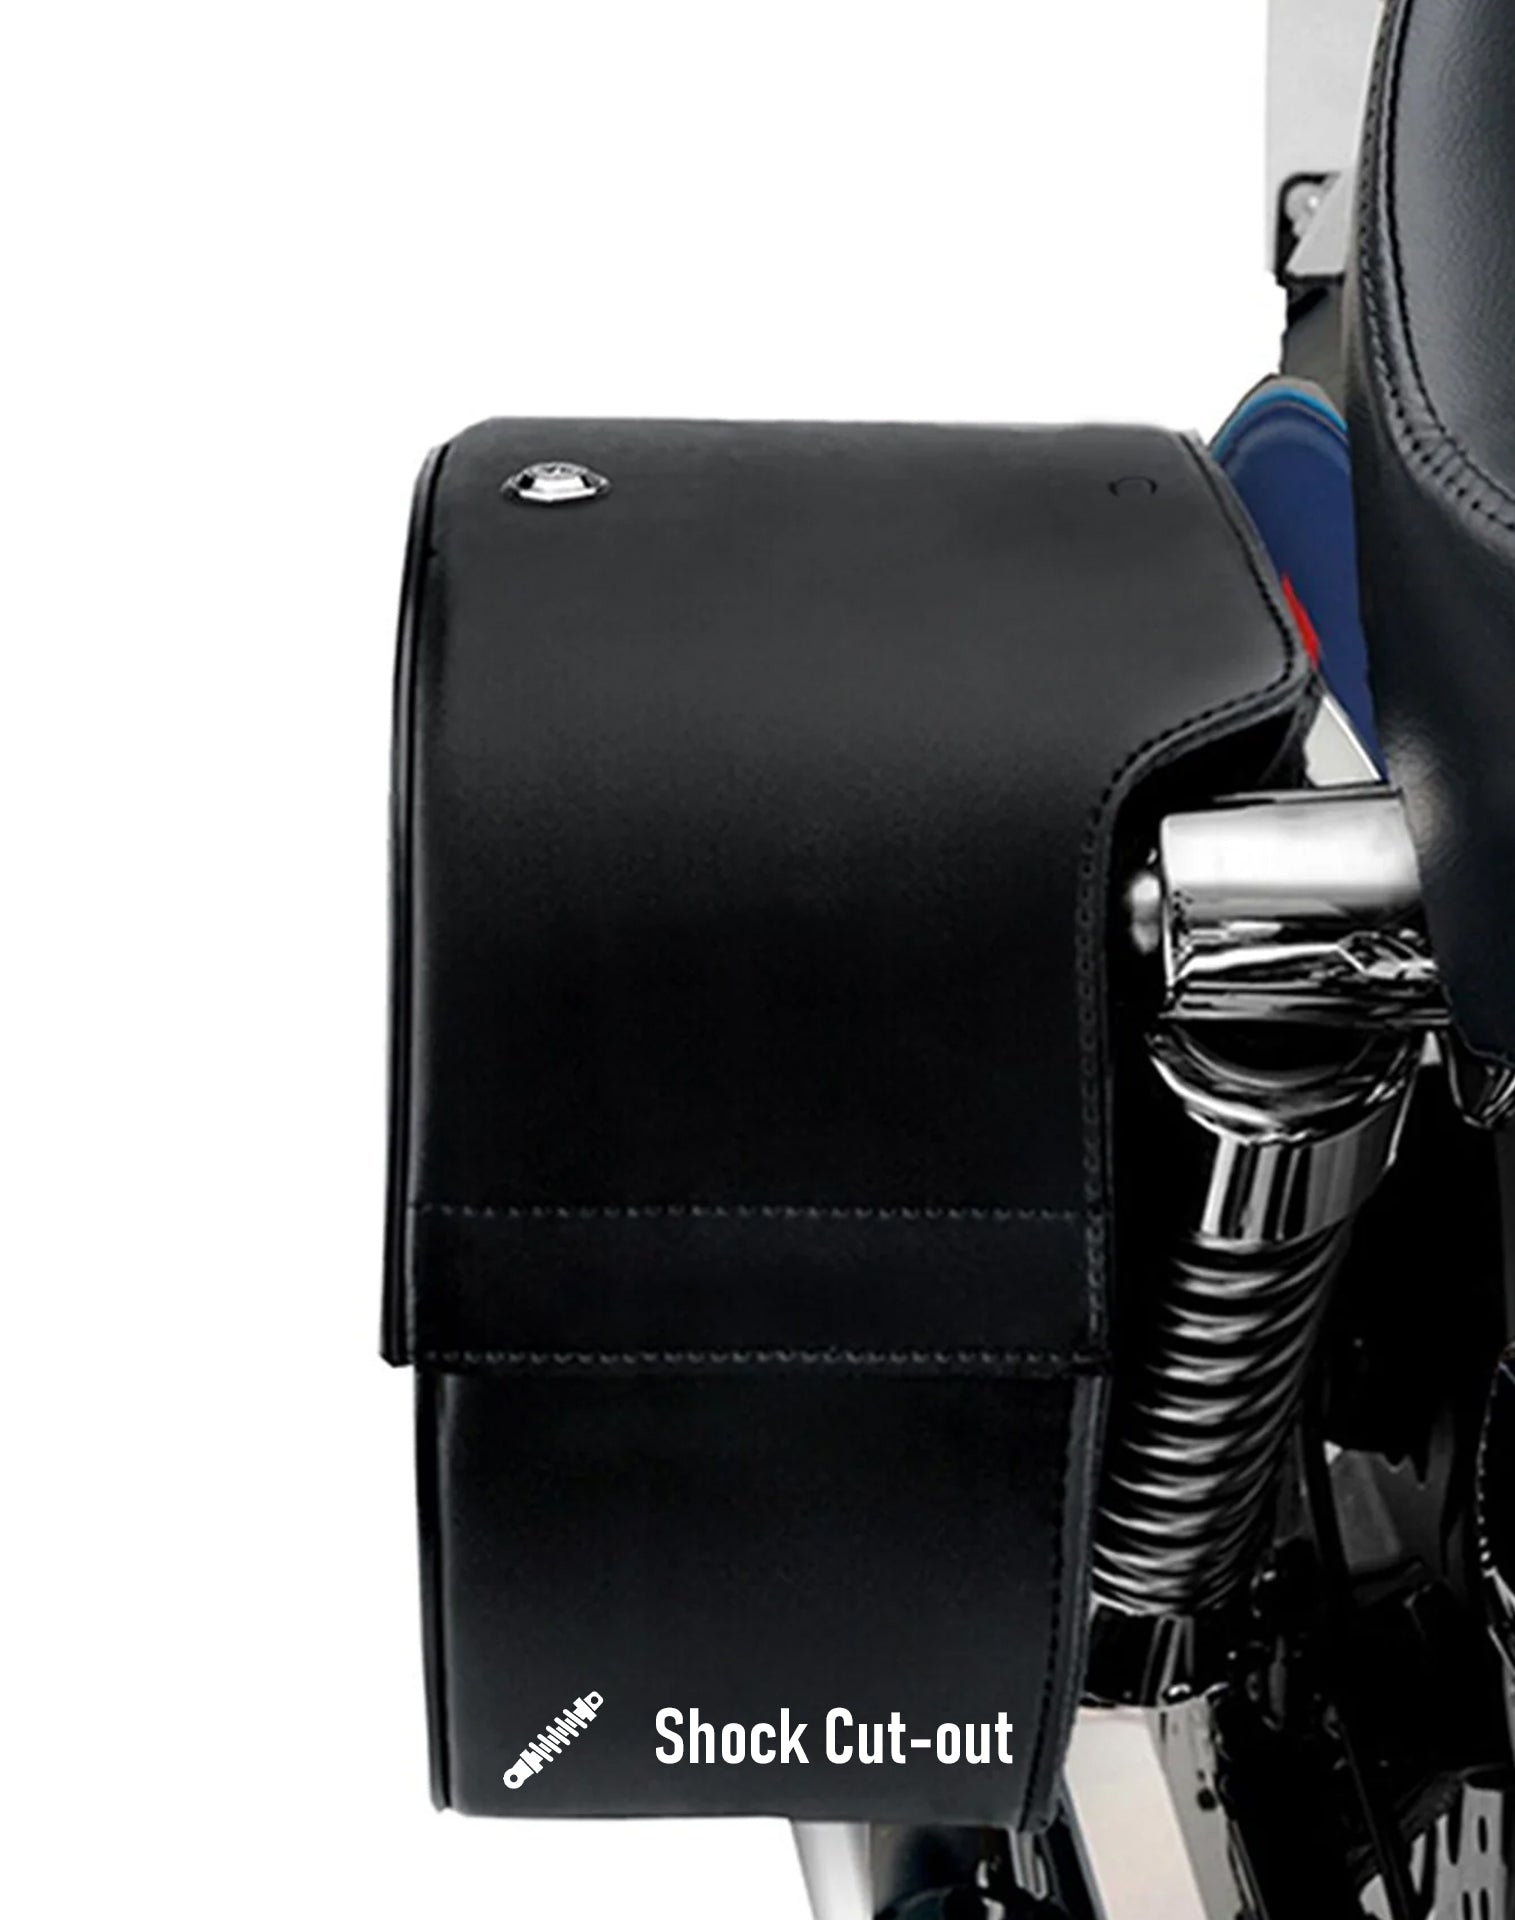 26L - Pantheon Large Shock Cutout Leather Saddlebags for Harley Sportster 883 Custom XL883C/XLH883C